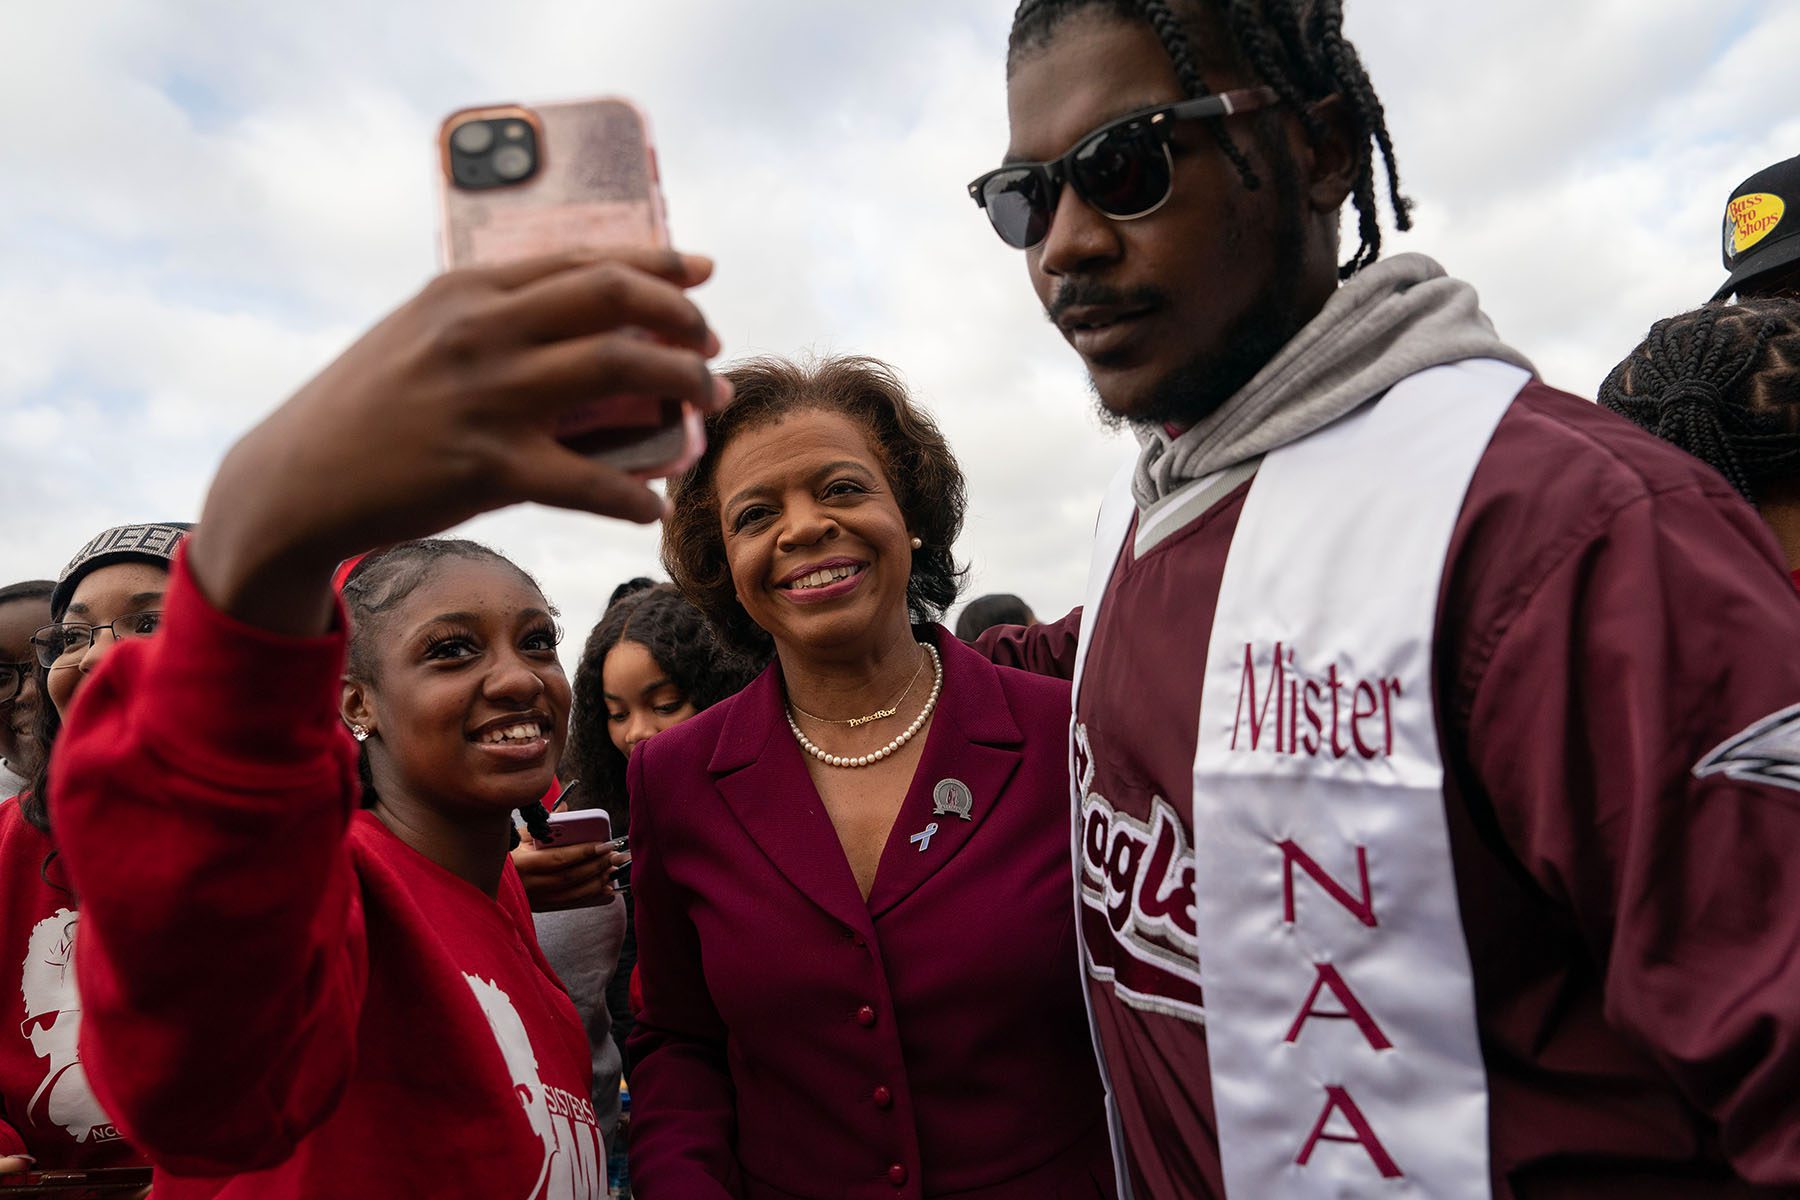 Cheri Beasley takes a selfie with two supporters while walking in the North Carolina Central University Homecoming Parade.